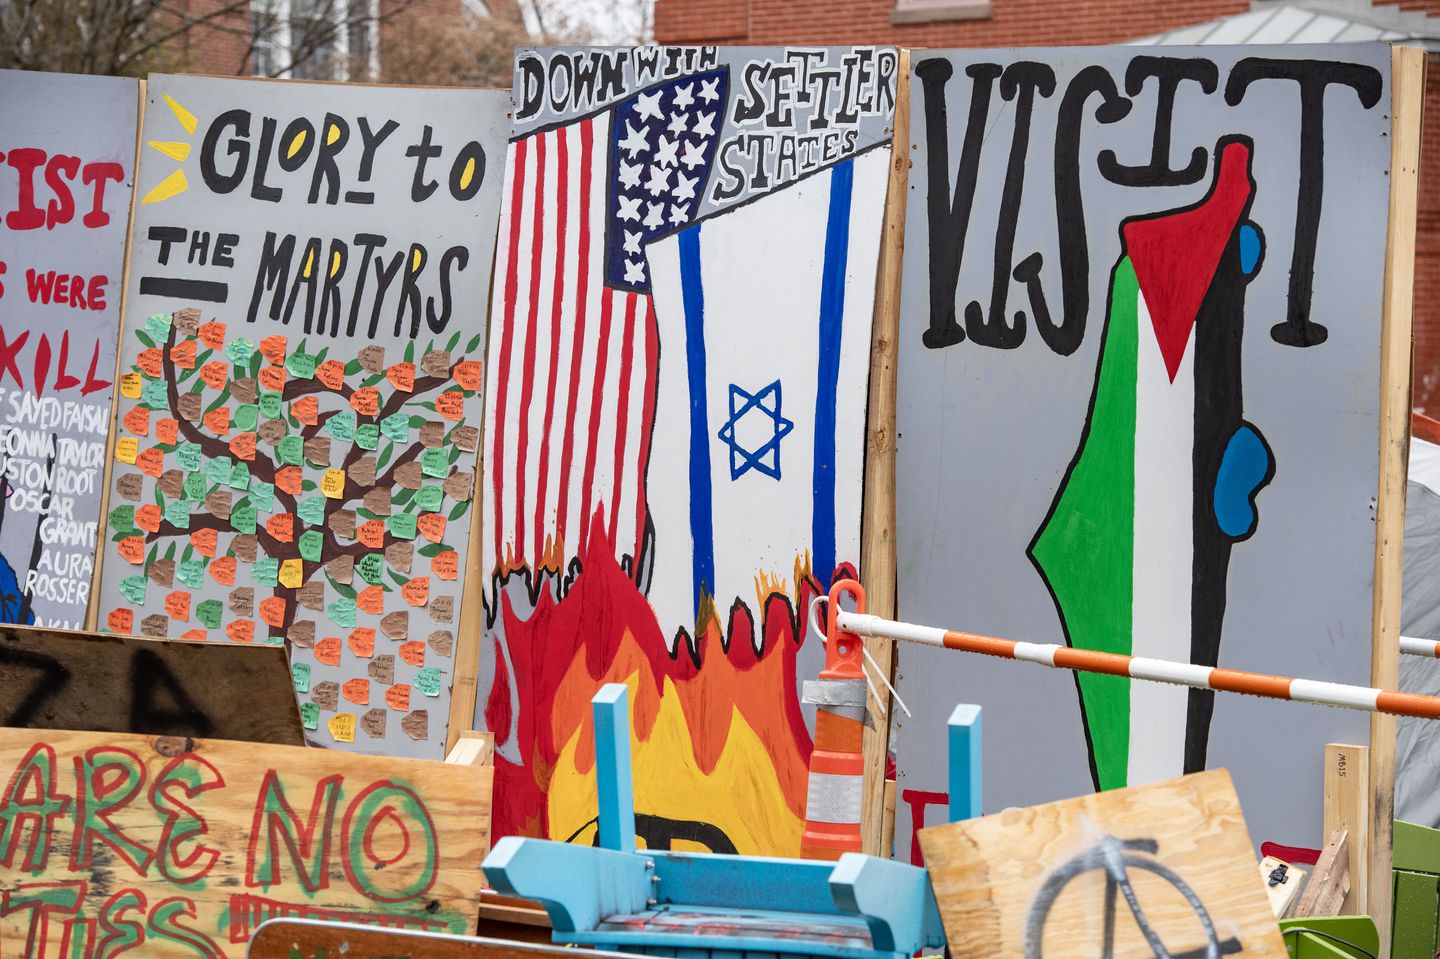 The pro-Palestinian protest encampment at Tufts University in Medford, on May 1. The weeks of demonstrations, the most sweeping and prolonged unrest to rock US college campuses since the Vietnam war protests of the 1960s and 70s, led to thousands arrests of students and other activists.